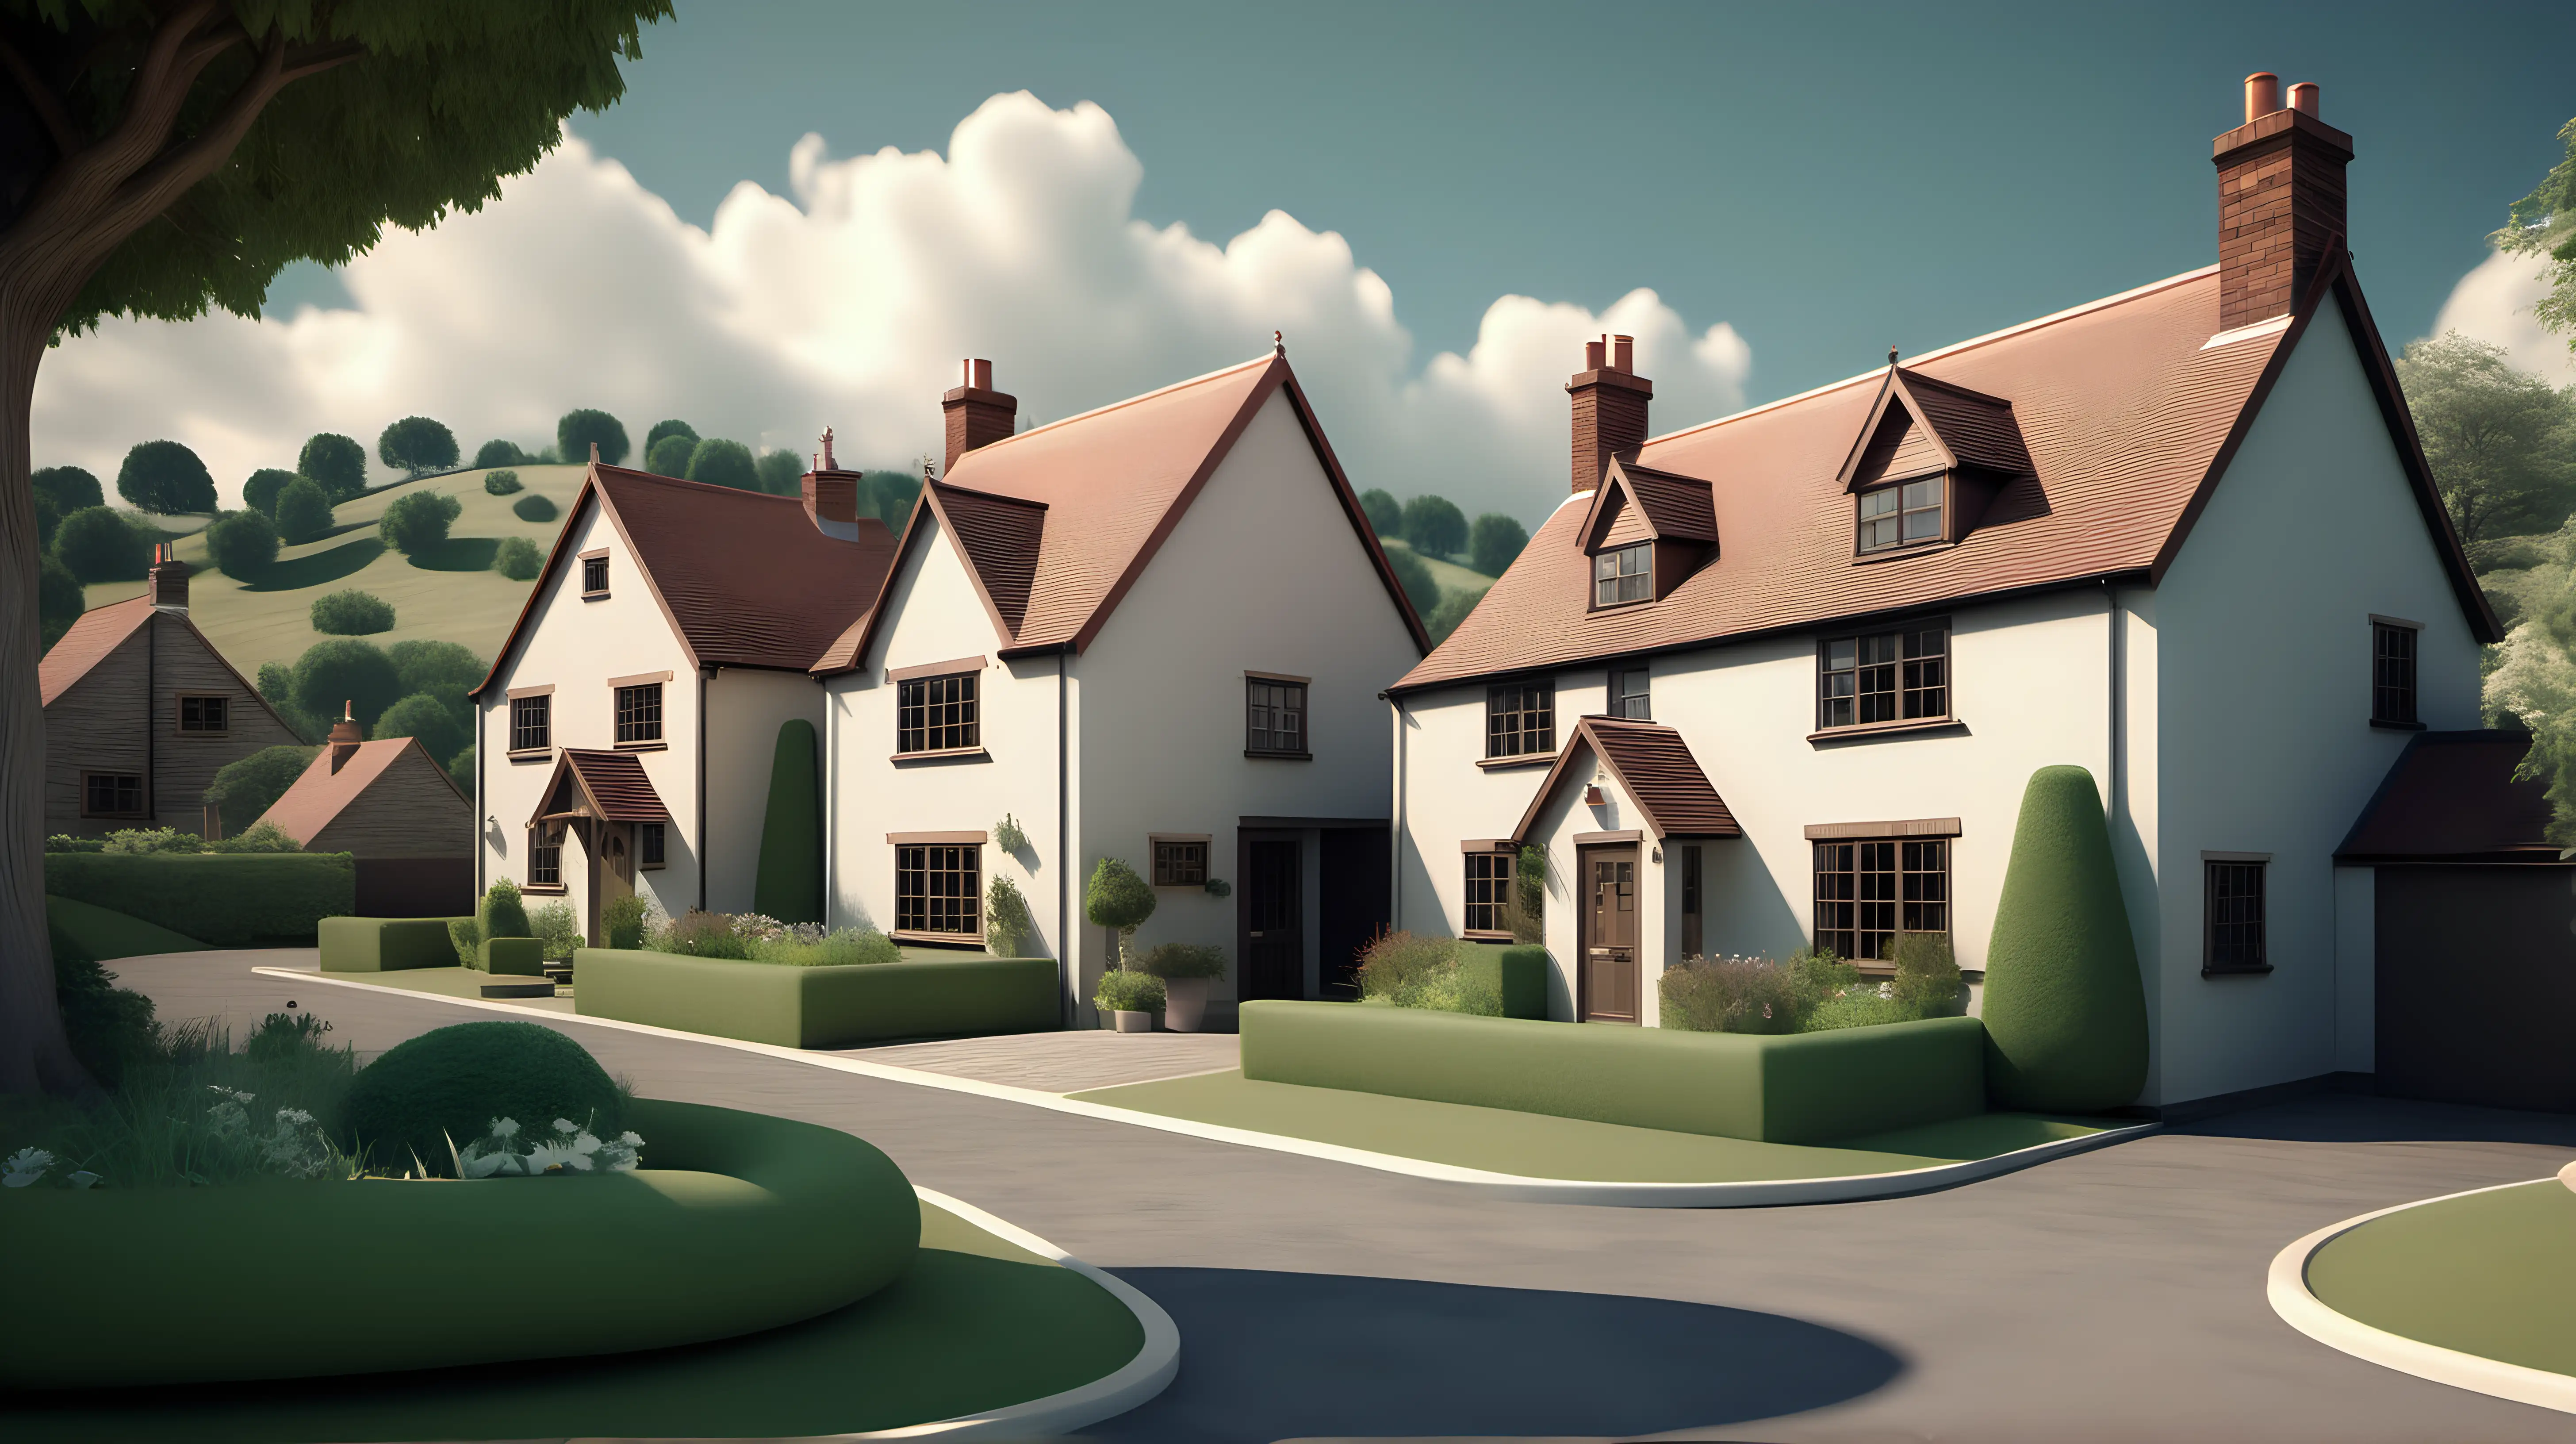 Charming English Village Scene with Detached House and Picturesque Hills